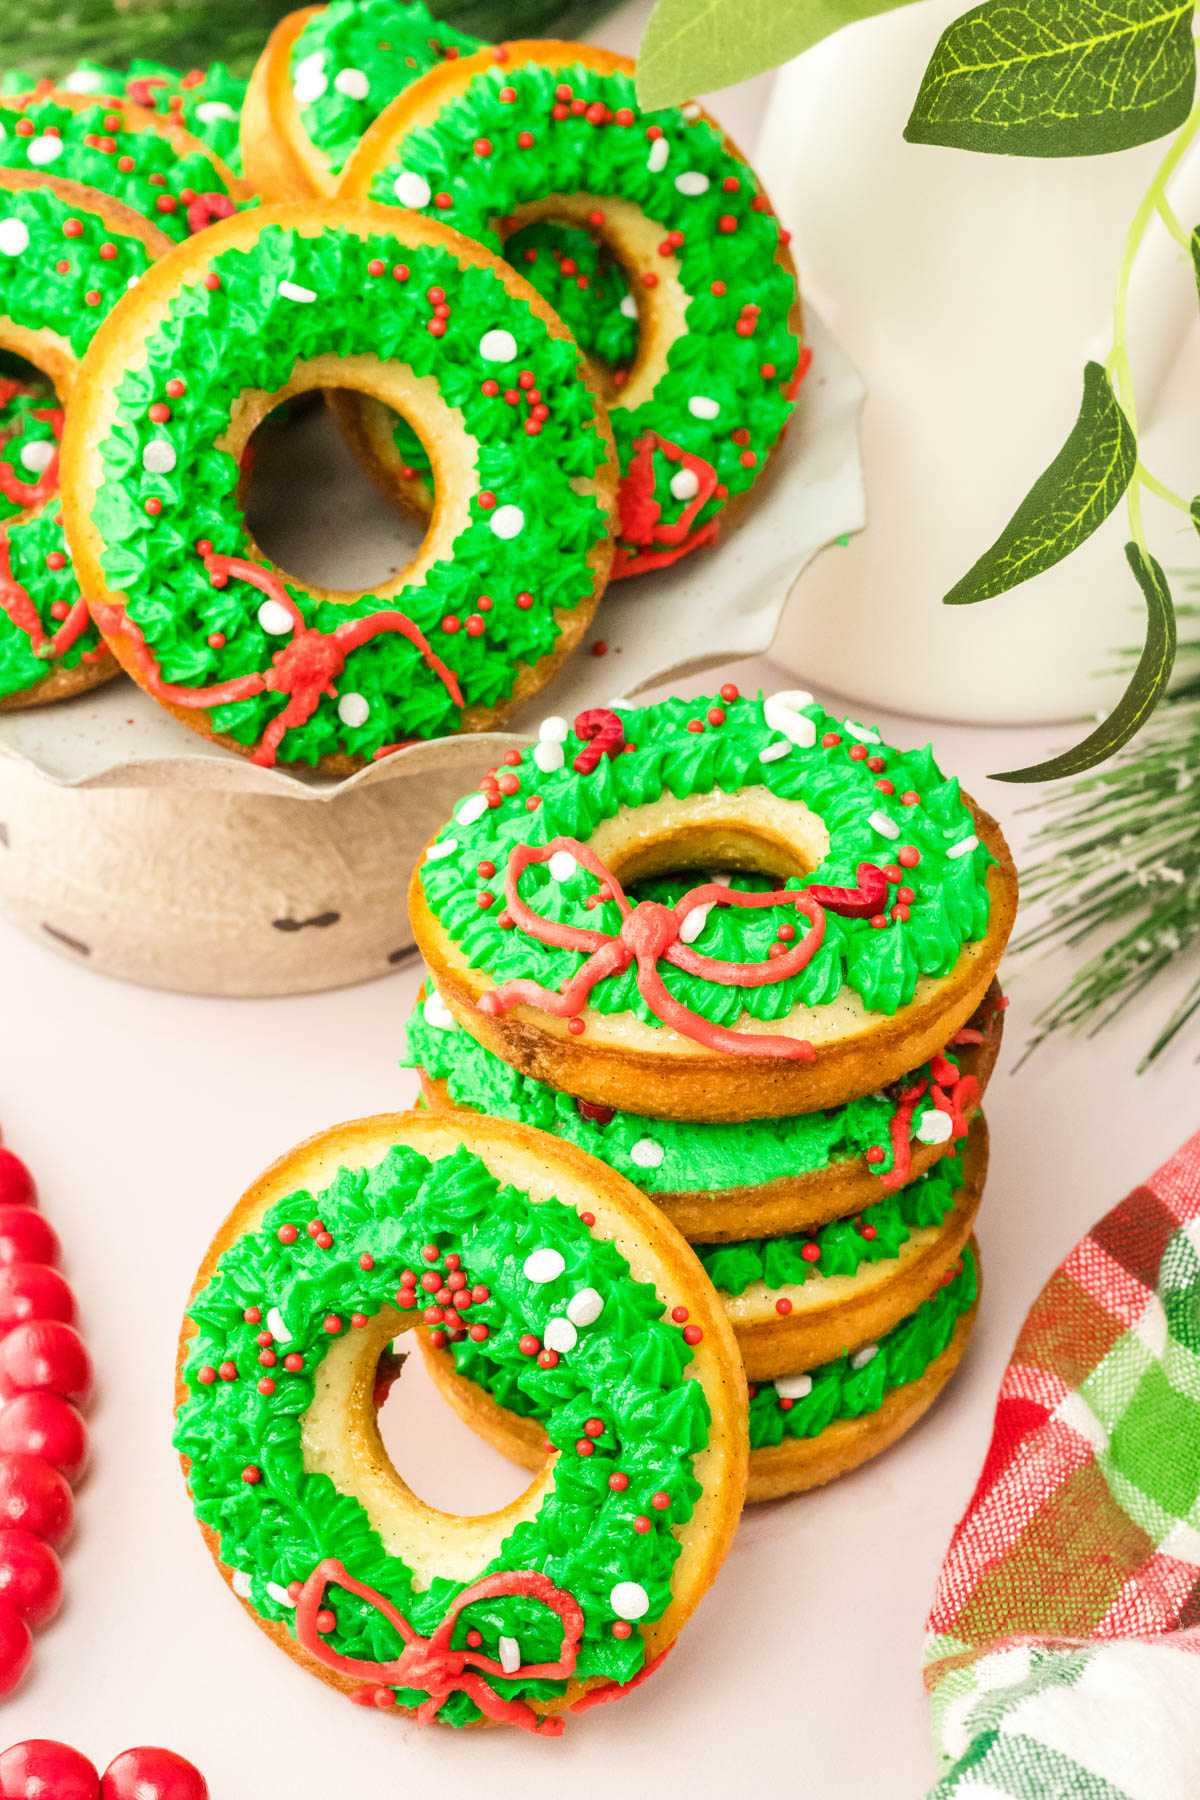 A plate of donuts decorated with green and red icing.